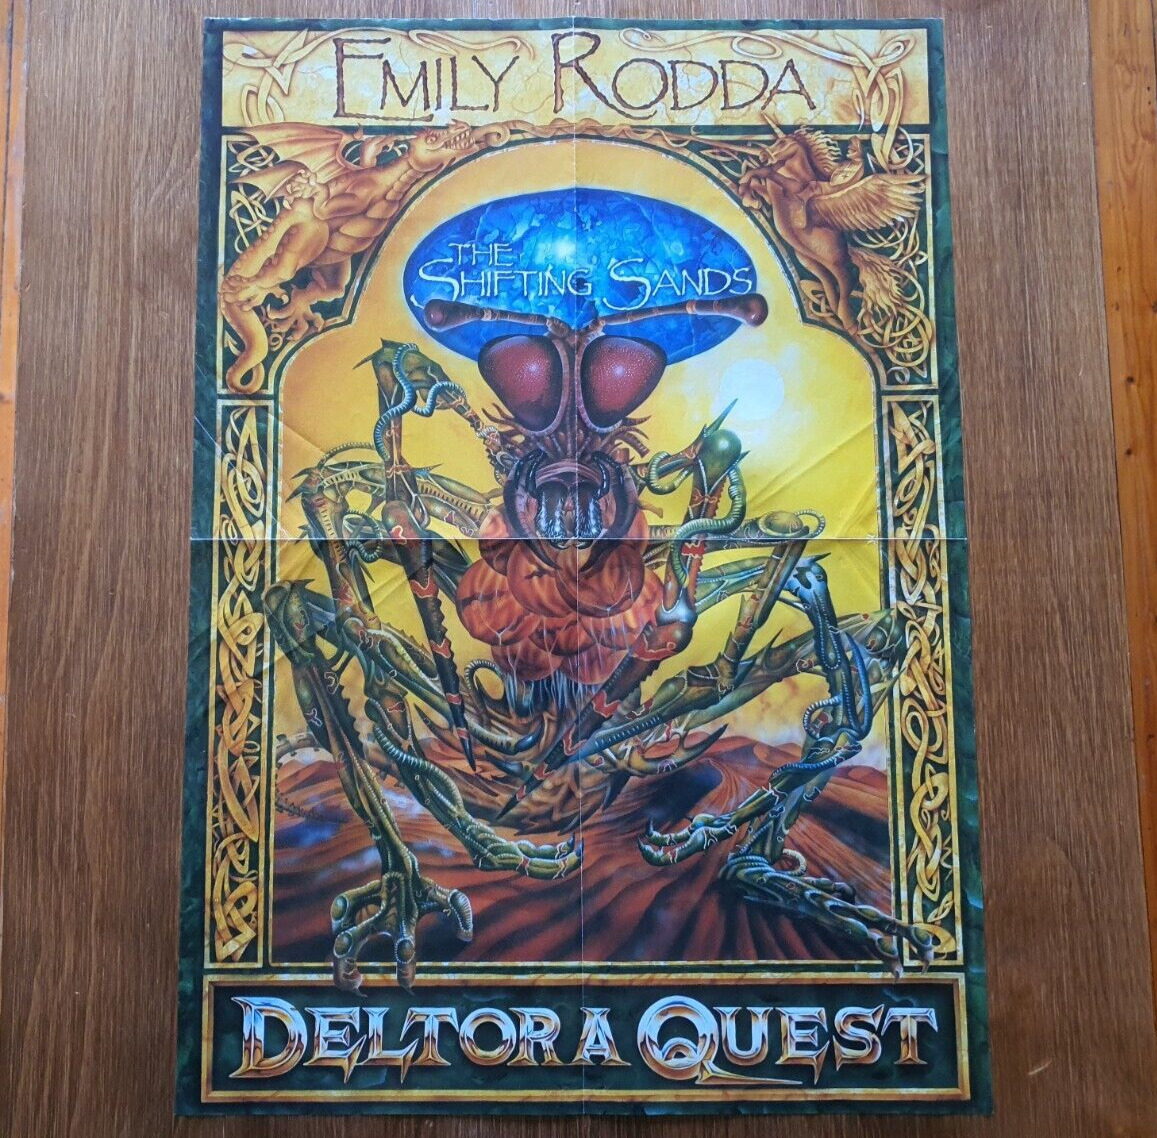 Deltora Quest: The Shifting Sands - Collectable Poster - Fantasy Artwork